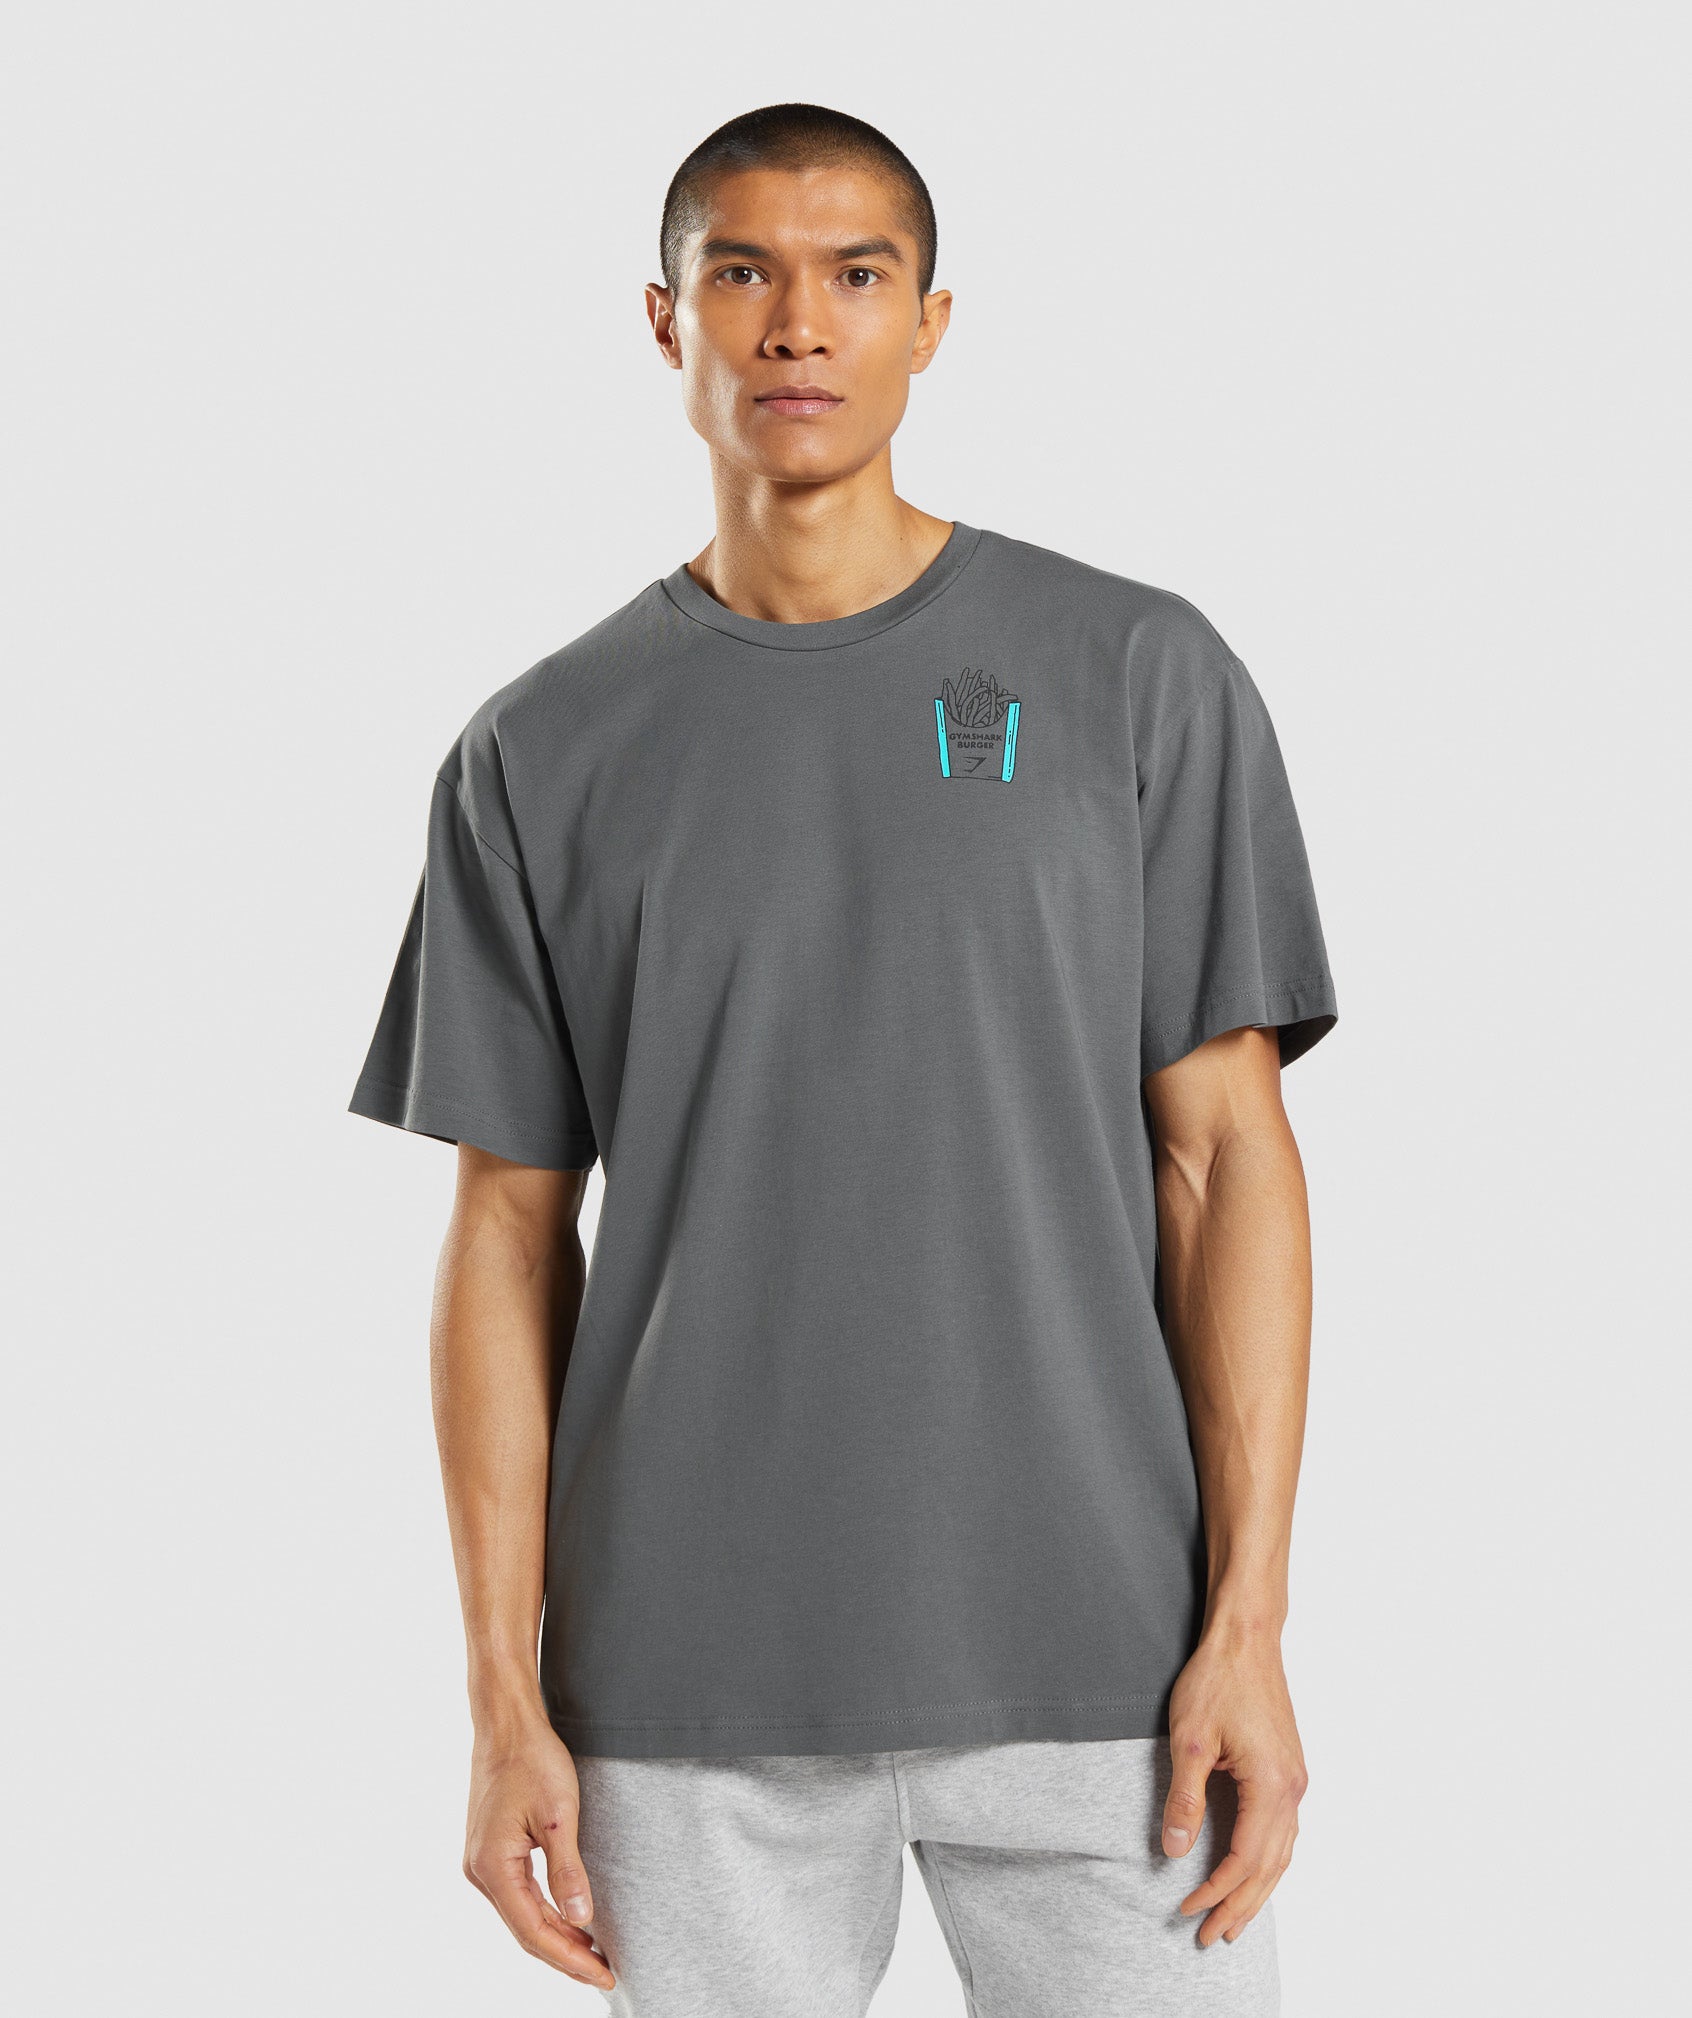 Diner Graphic Oversized T-Shirt in Charcoal - view 2